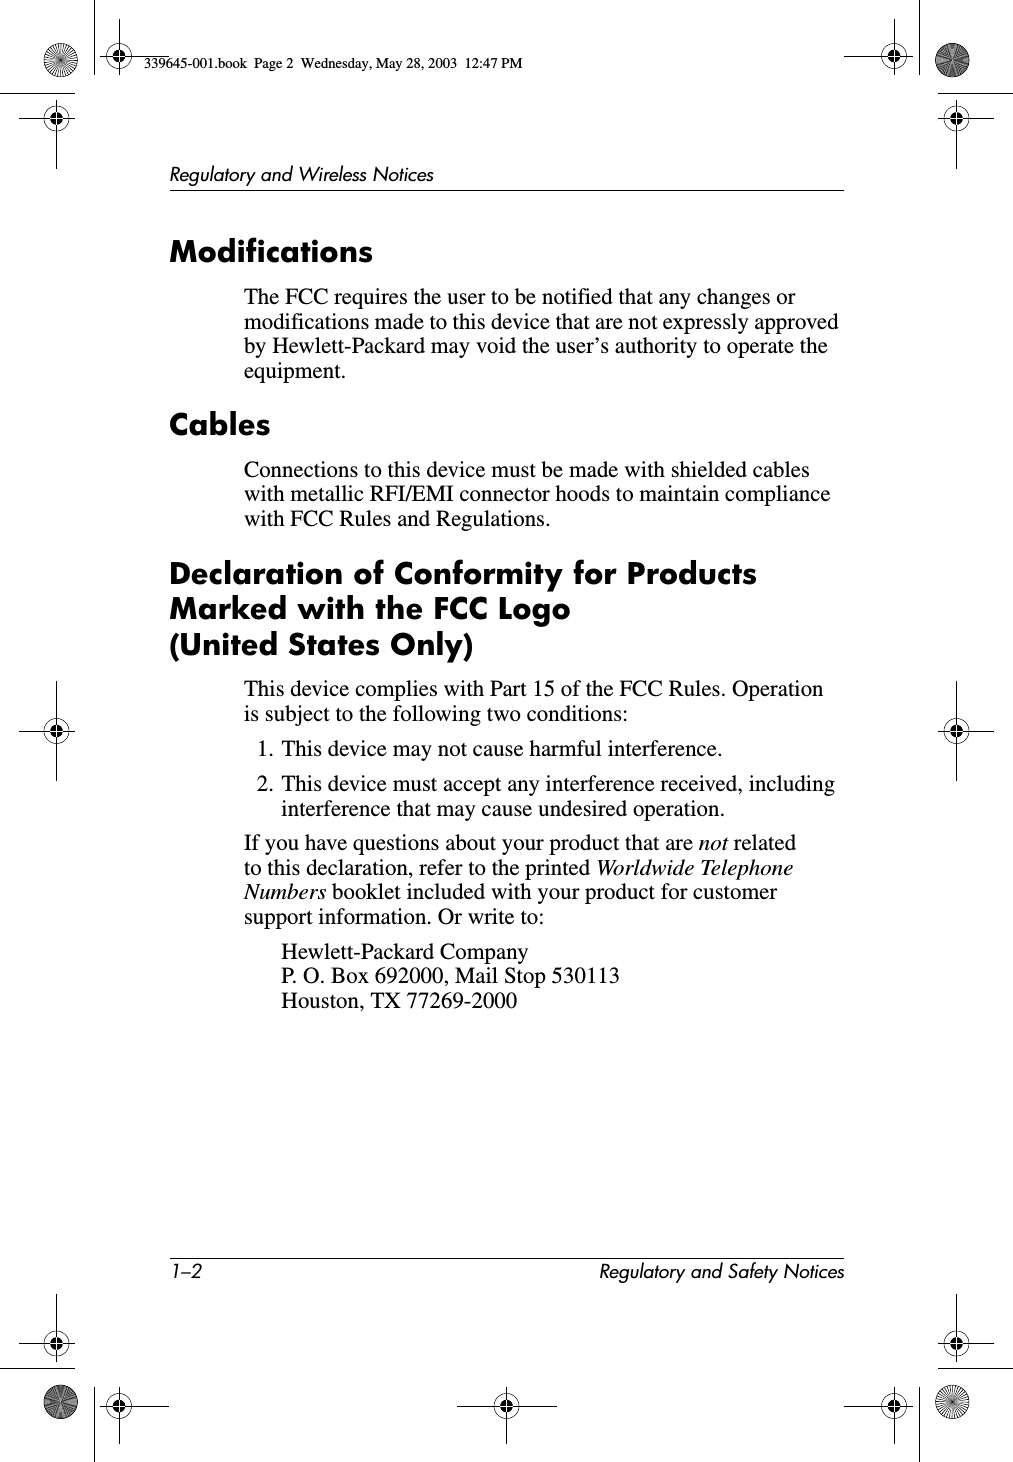 1–2 Regulatory and Safety NoticesRegulatory and Wireless NoticesModificationsThe FCC requires the user to be notified that any changes or modifications made to this device that are not expressly approved by Hewlett-Packard may void the user’s authority to operate the equipment.CablesConnections to this device must be made with shielded cables with metallic RFI/EMI connector hoods to maintain compliance with FCC Rules and Regulations.Declaration of Conformity for Products Marked with the FCC Logo (United States Only)This device complies with Part 15 of the FCC Rules. Operation is subject to the following two conditions:1. This device may not cause harmful interference.2. This device must accept any interference received, including interference that may cause undesired operation.If you have questions about your product that are not related to this declaration, refer to the printed Worldwide Telephone Numbers booklet included with your product for customer support information. Or write to:Hewlett-Packard CompanyP. O. Box 692000, Mail Stop 530113Houston, TX 77269-2000339645-001.book  Page 2  Wednesday, May 28, 2003  12:47 PM